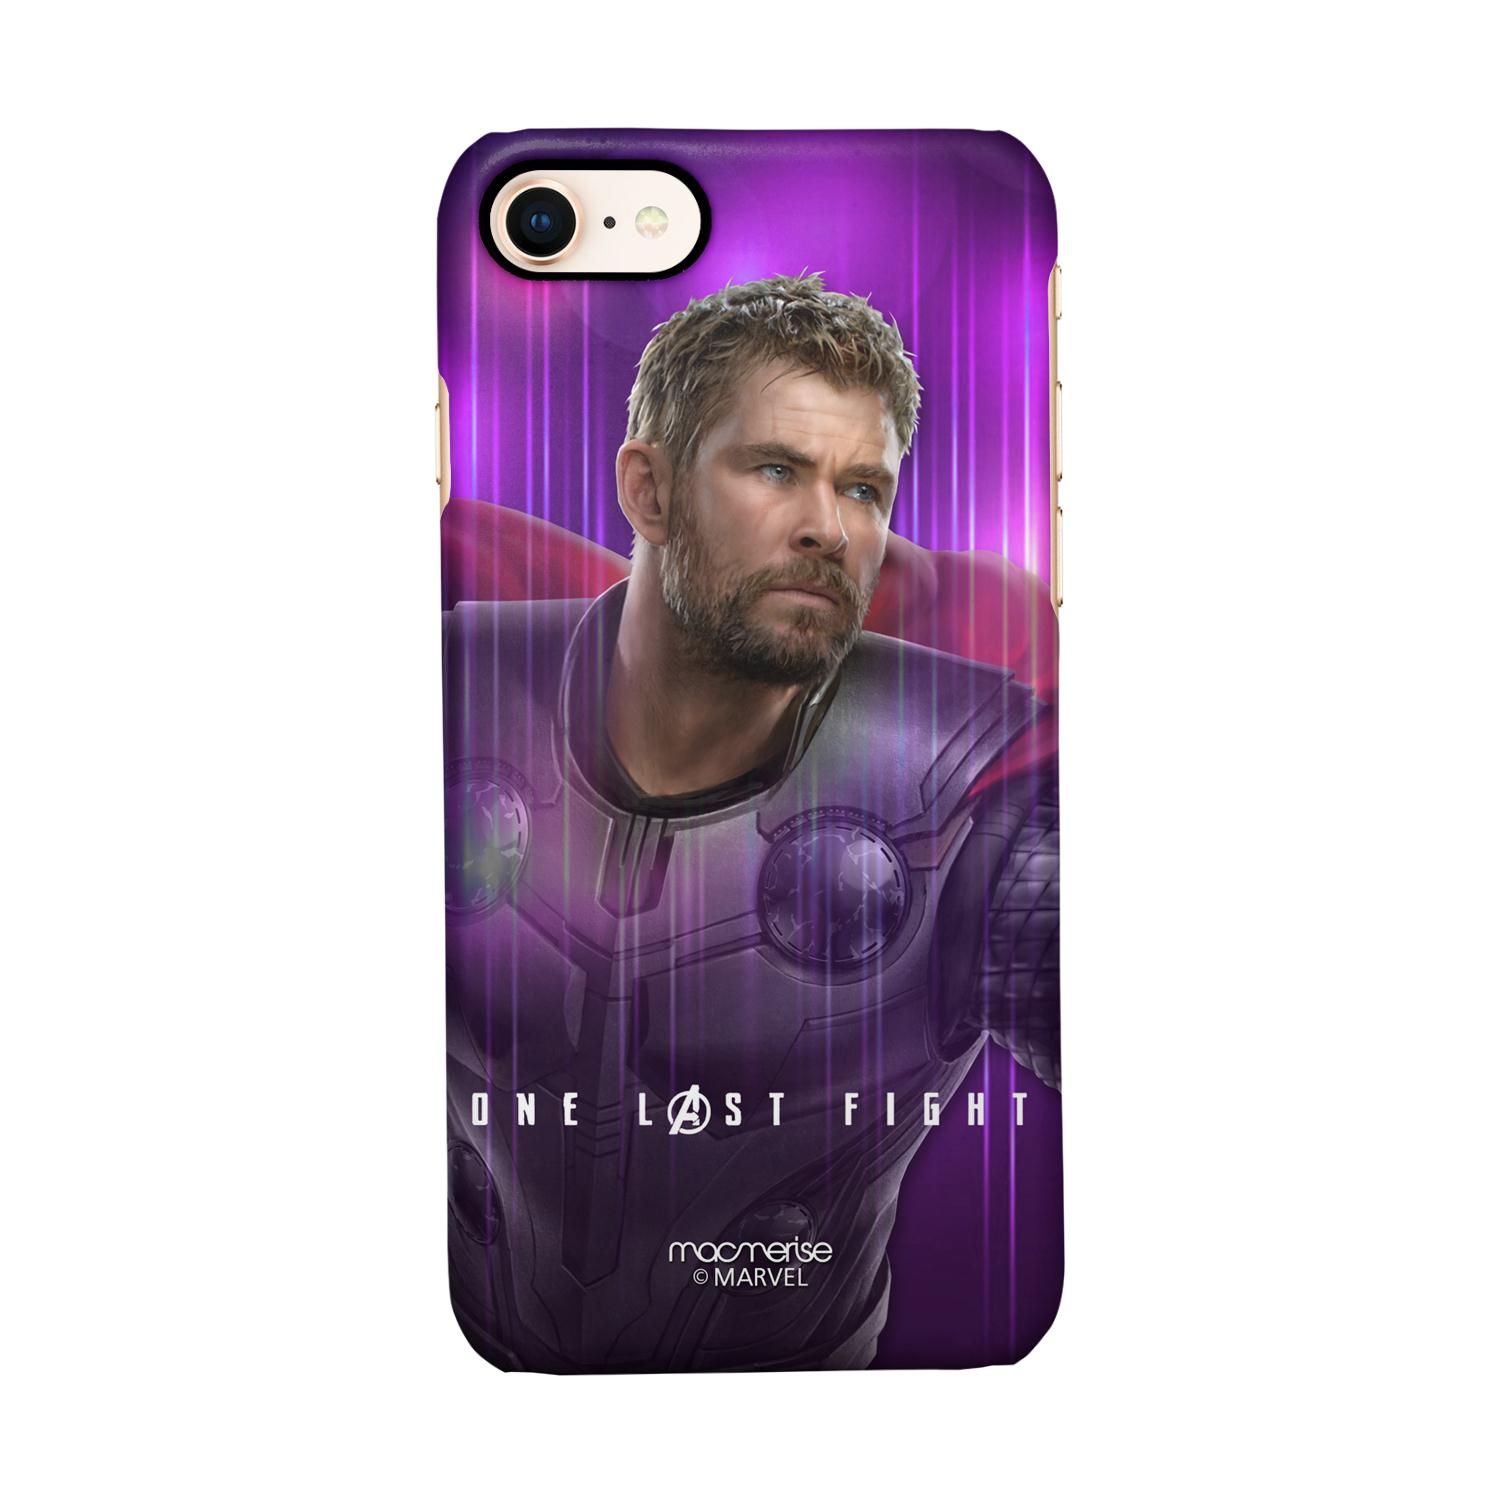 Buy One Last Fight - Sleek Phone Case for iPhone 7 Online